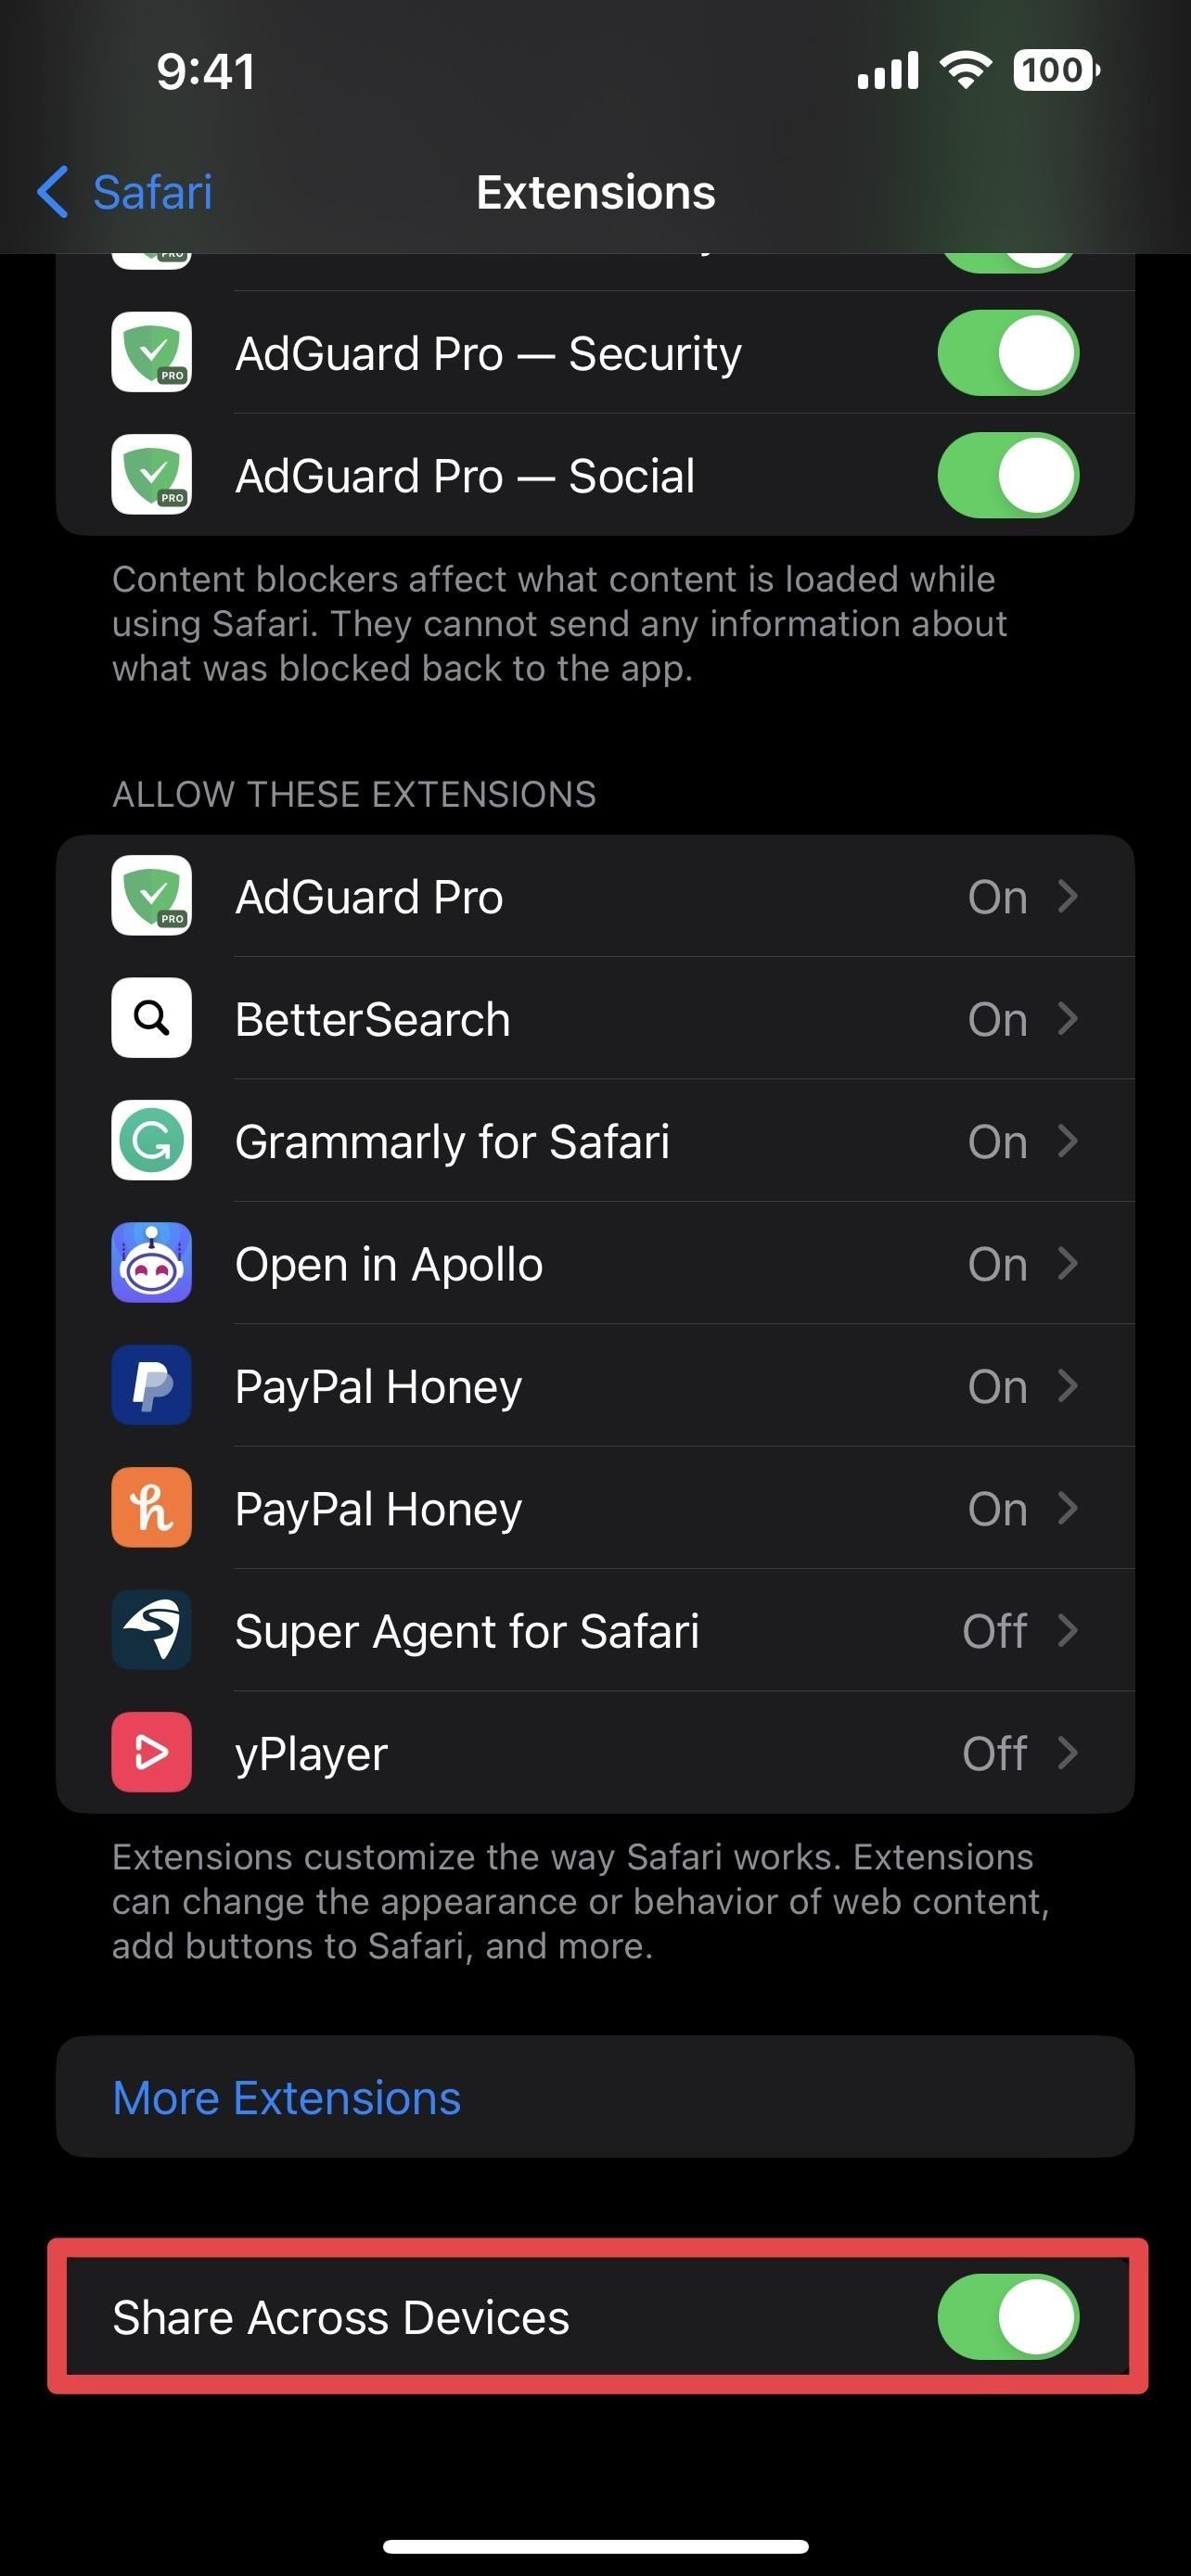 Safari Now Lets You Sync and Manage All Your Web Extensions Across Your iPhone, iPad, and Mac